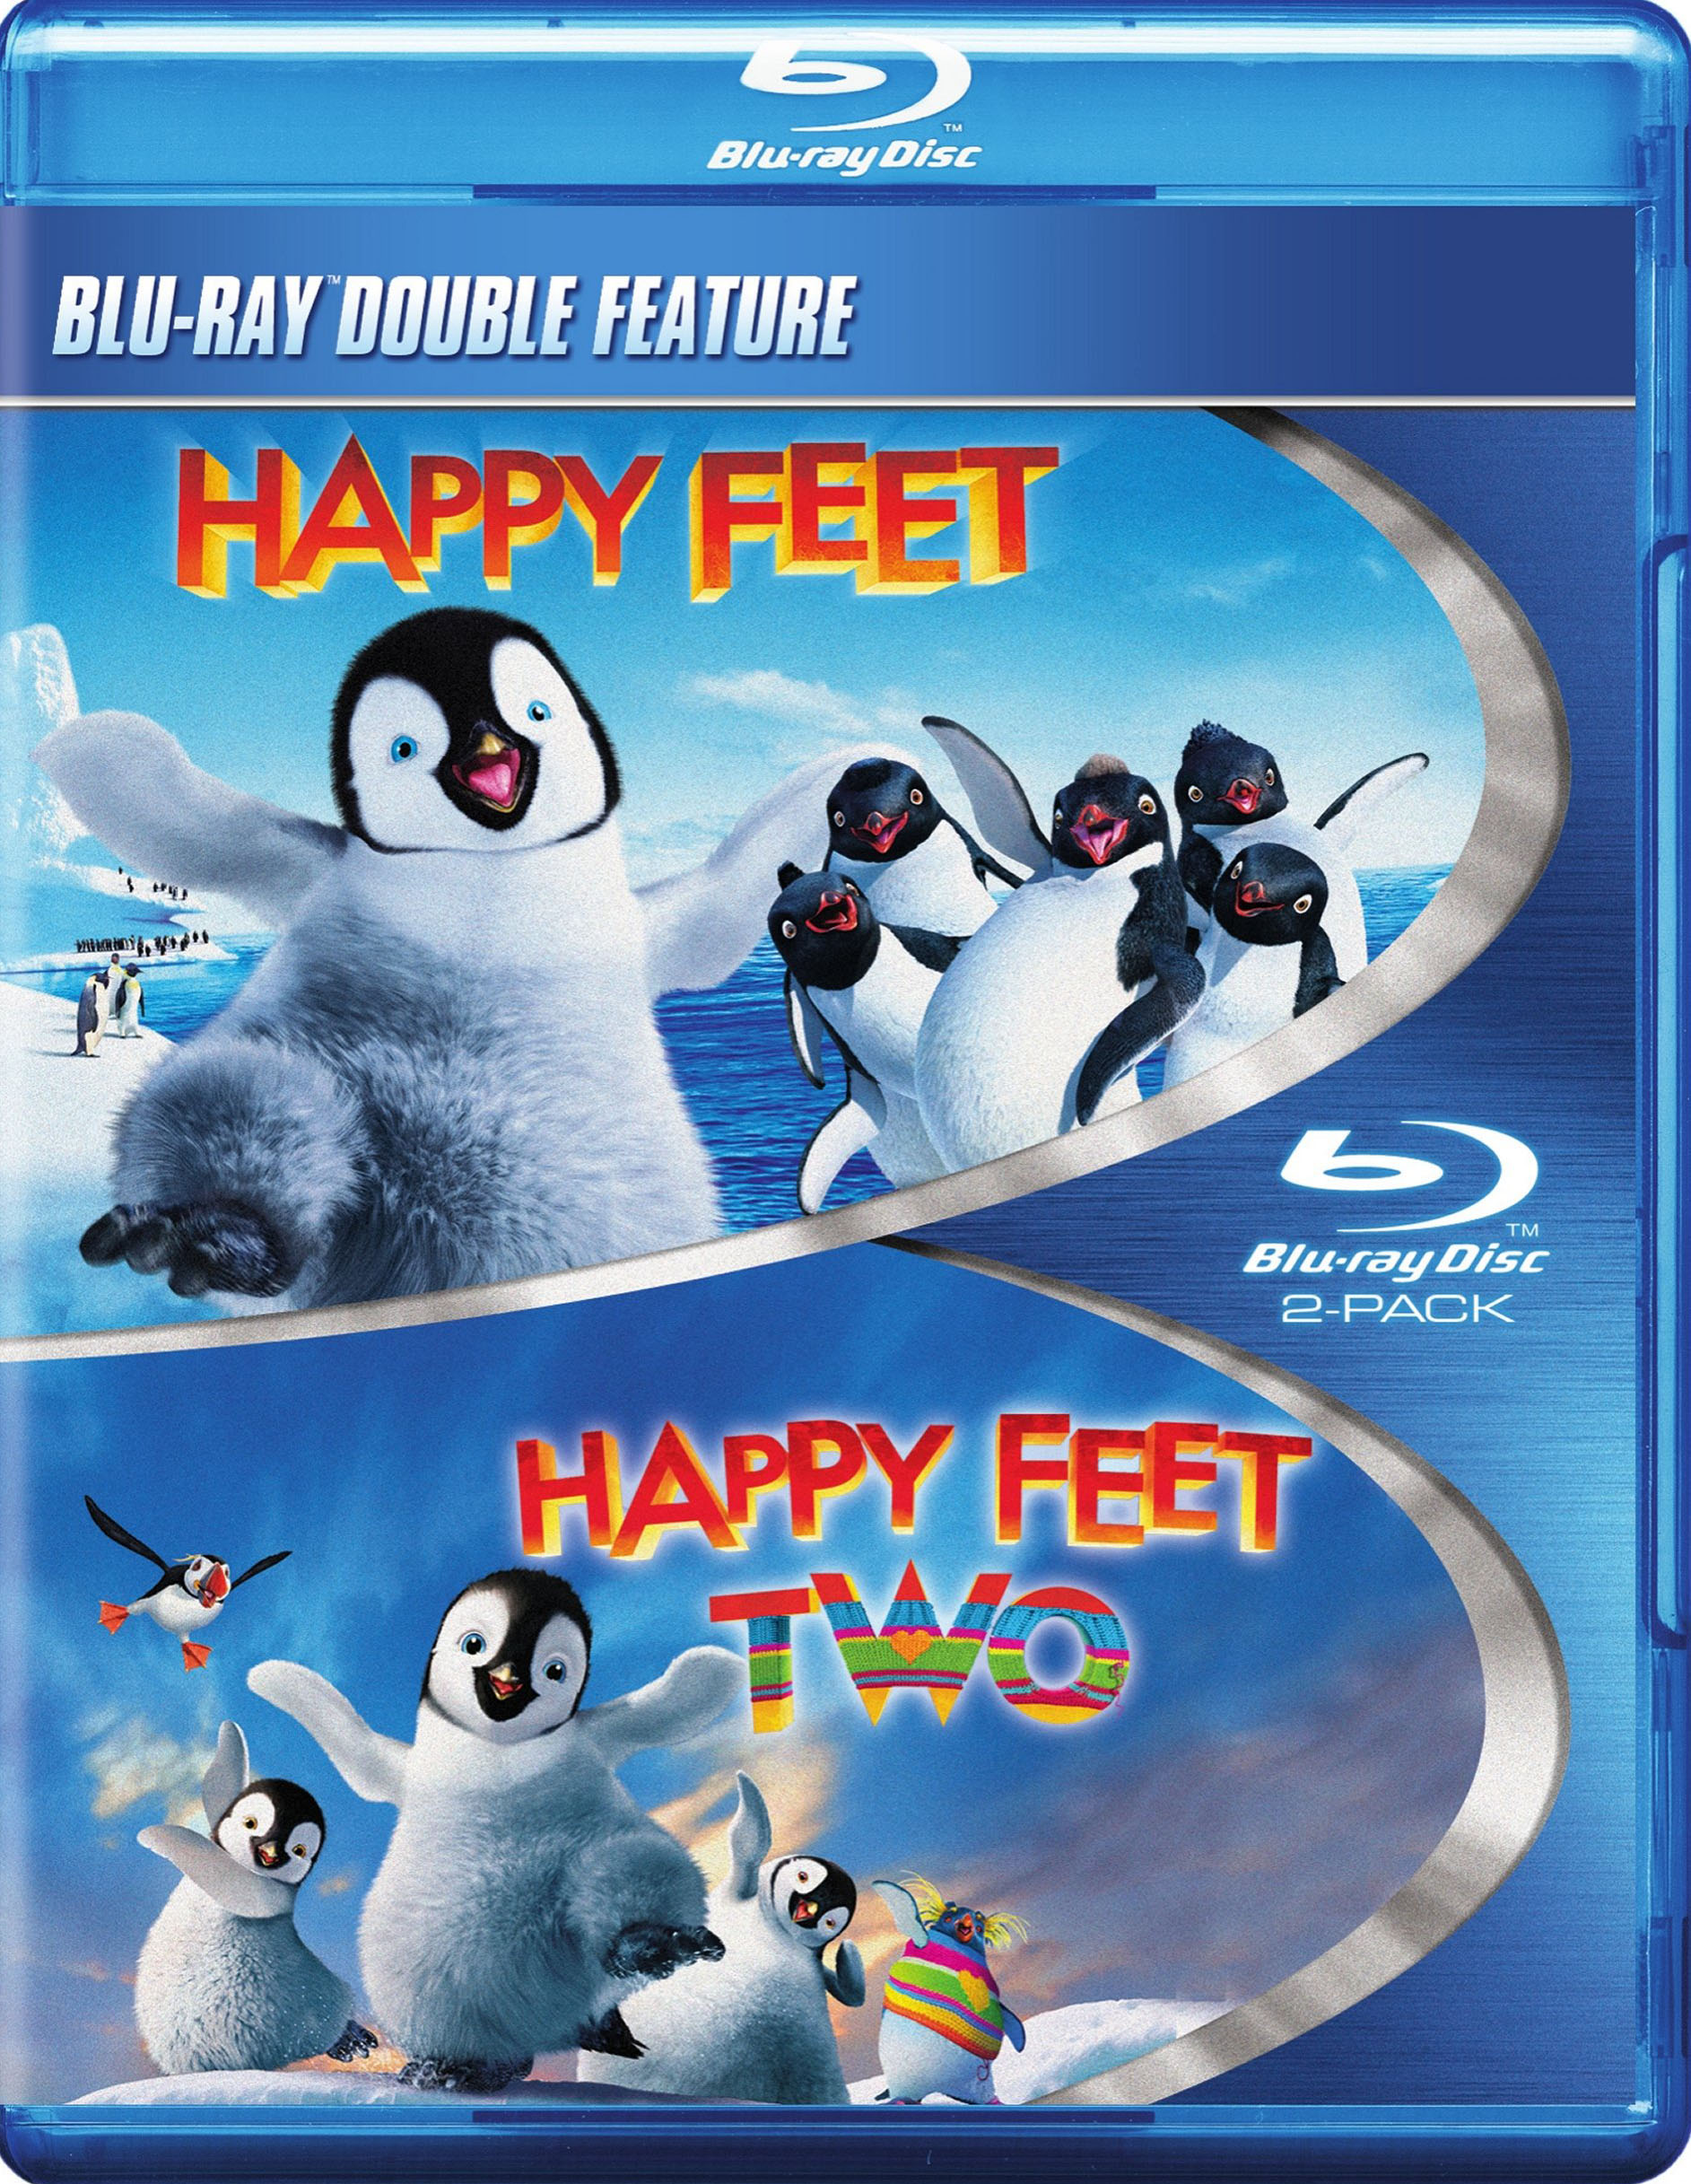 Poster HAPPY FEET - the five amigos